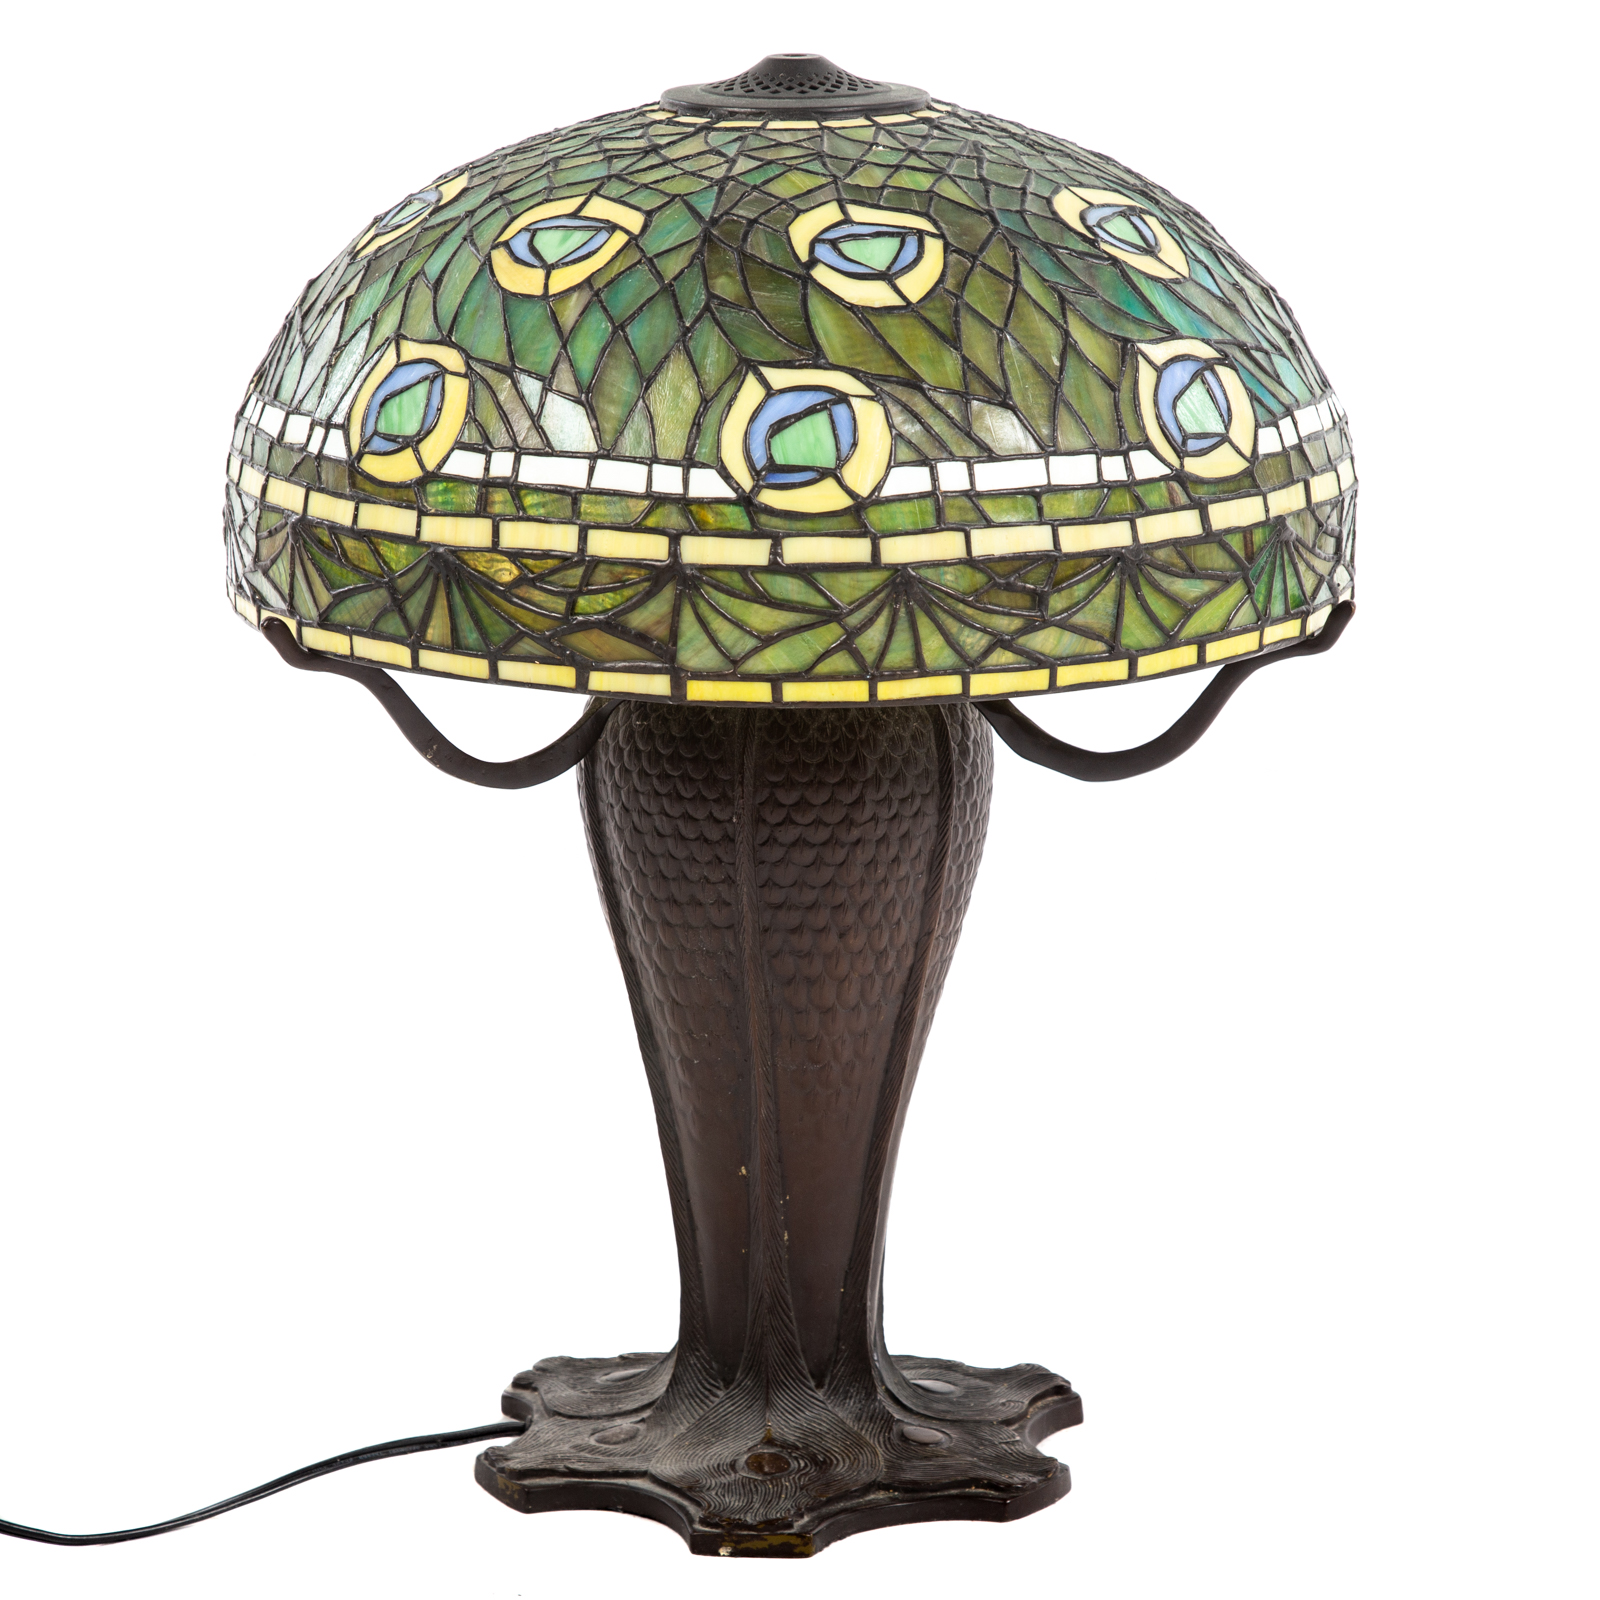 TIFFANY STYLE TABLE LAMP Quality